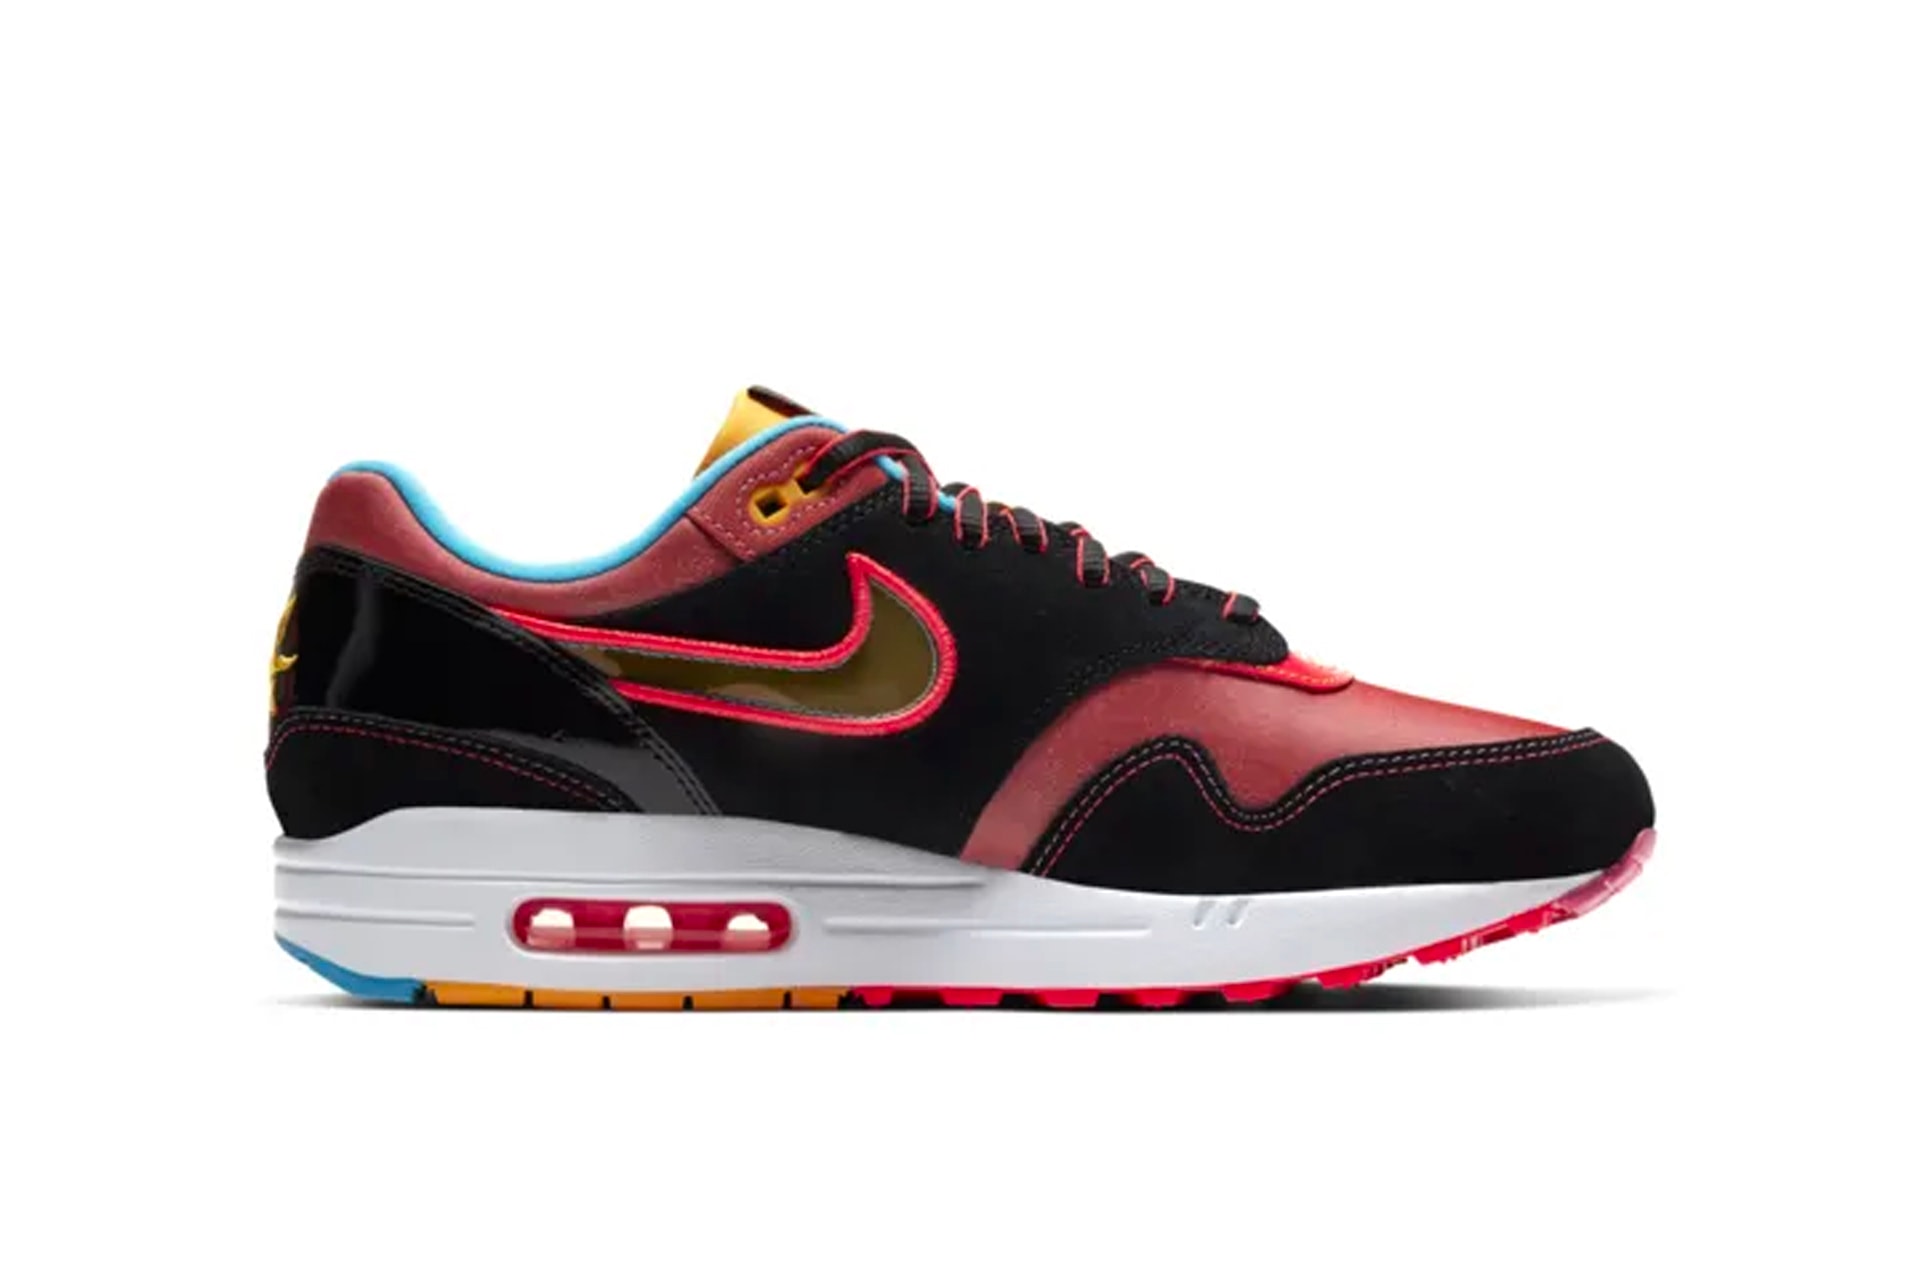 nike air max 1 nyc chinatown lunar new year chinese sneakers footwear mythology mythical longma red black heritage shoe chollima runner